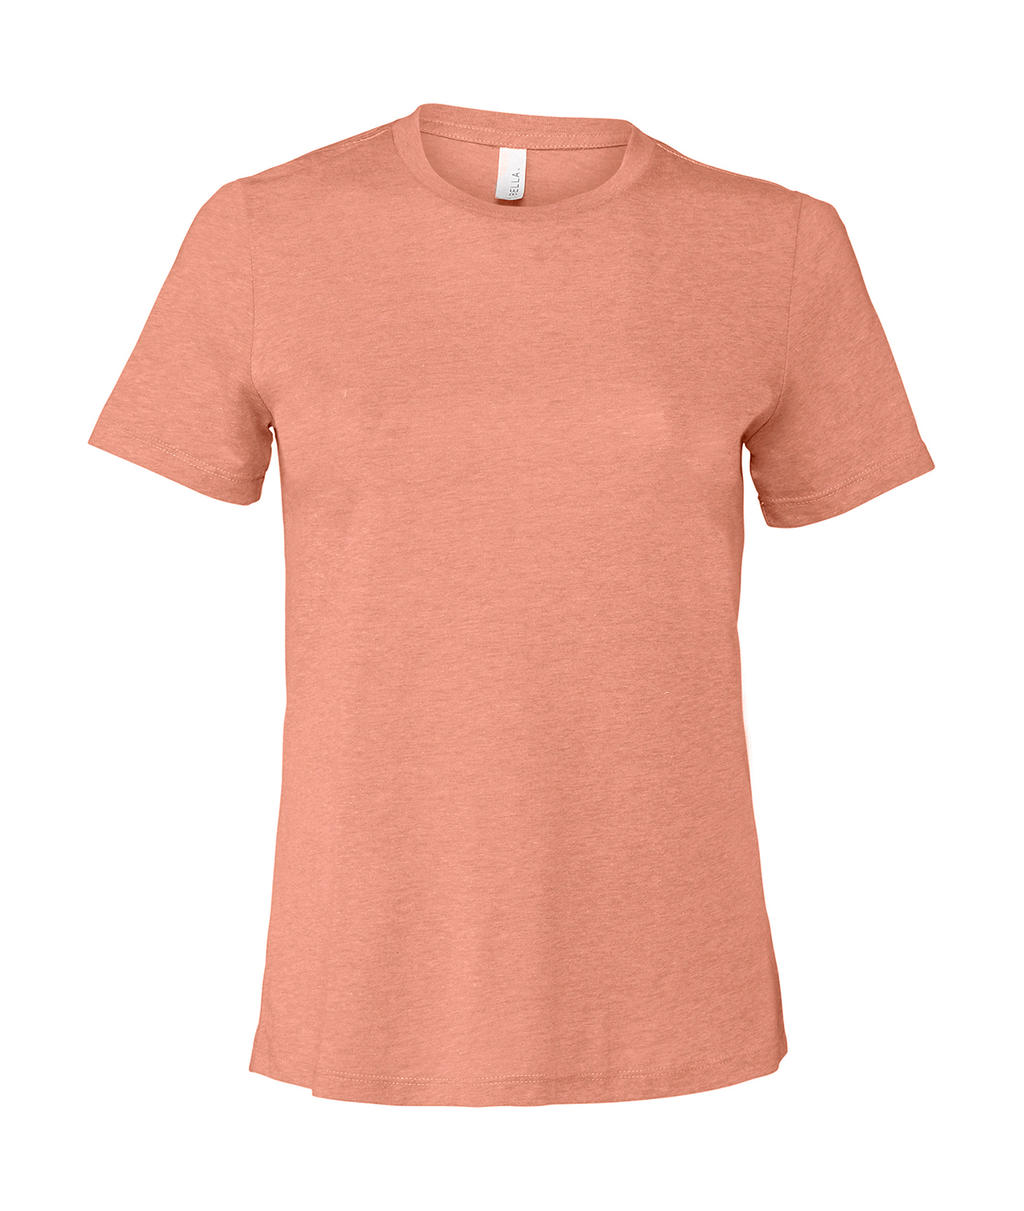  Womens Relaxed Jersey Short Sleeve Tee in Farbe Heather Sunset